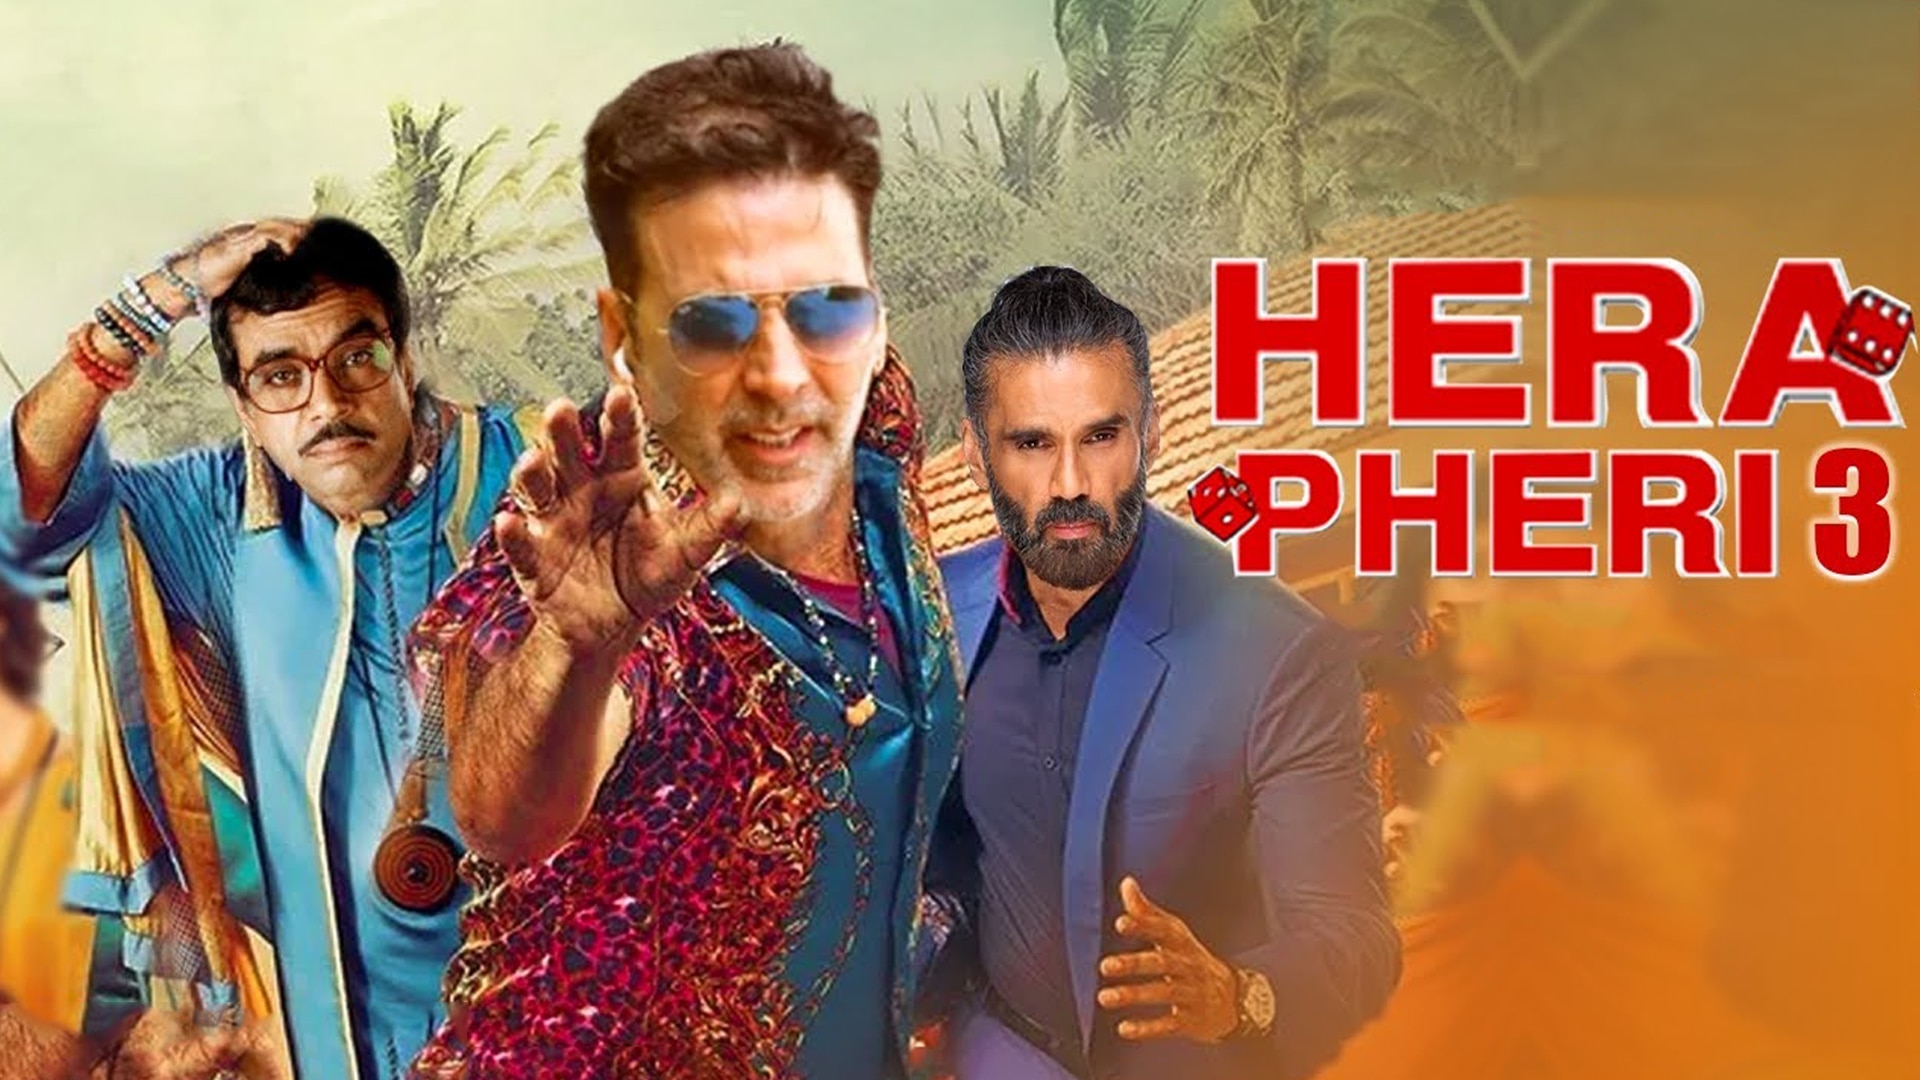 Apart From Hera Pheri 3, The Trio Of Akshay, Paresh And Suniel Will Make You Laugh In 2 More Films. ENT LIVE | Hera Pheri 3 के अलावा 2 और फिल्मों में